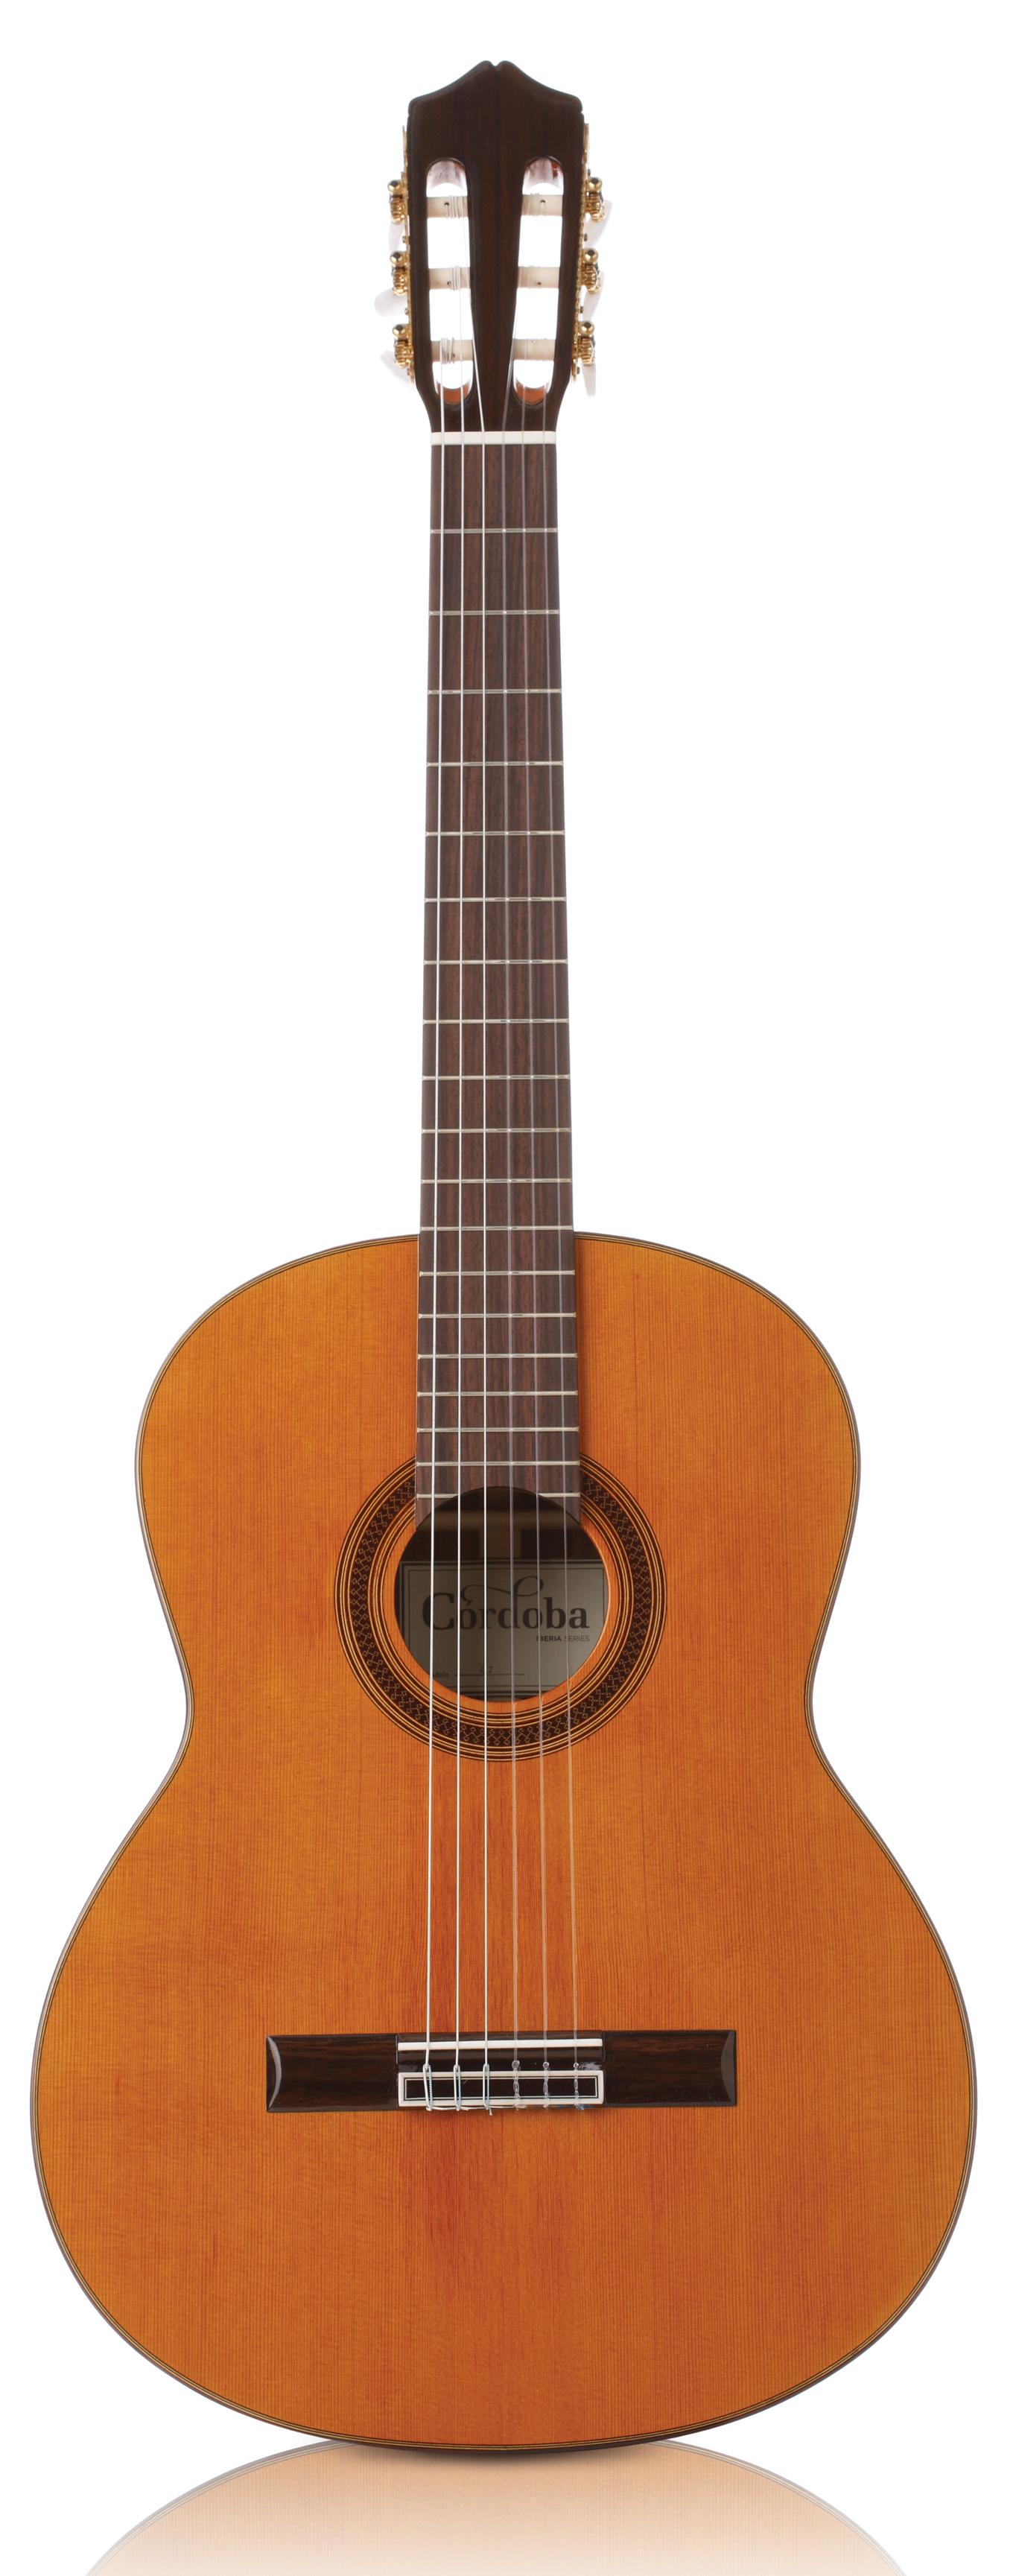 Cordoba C7 Cd Traditional 4/4 Epicea Palissandre Rw - Natural - Classical guitar 4/4 size - Variation 5